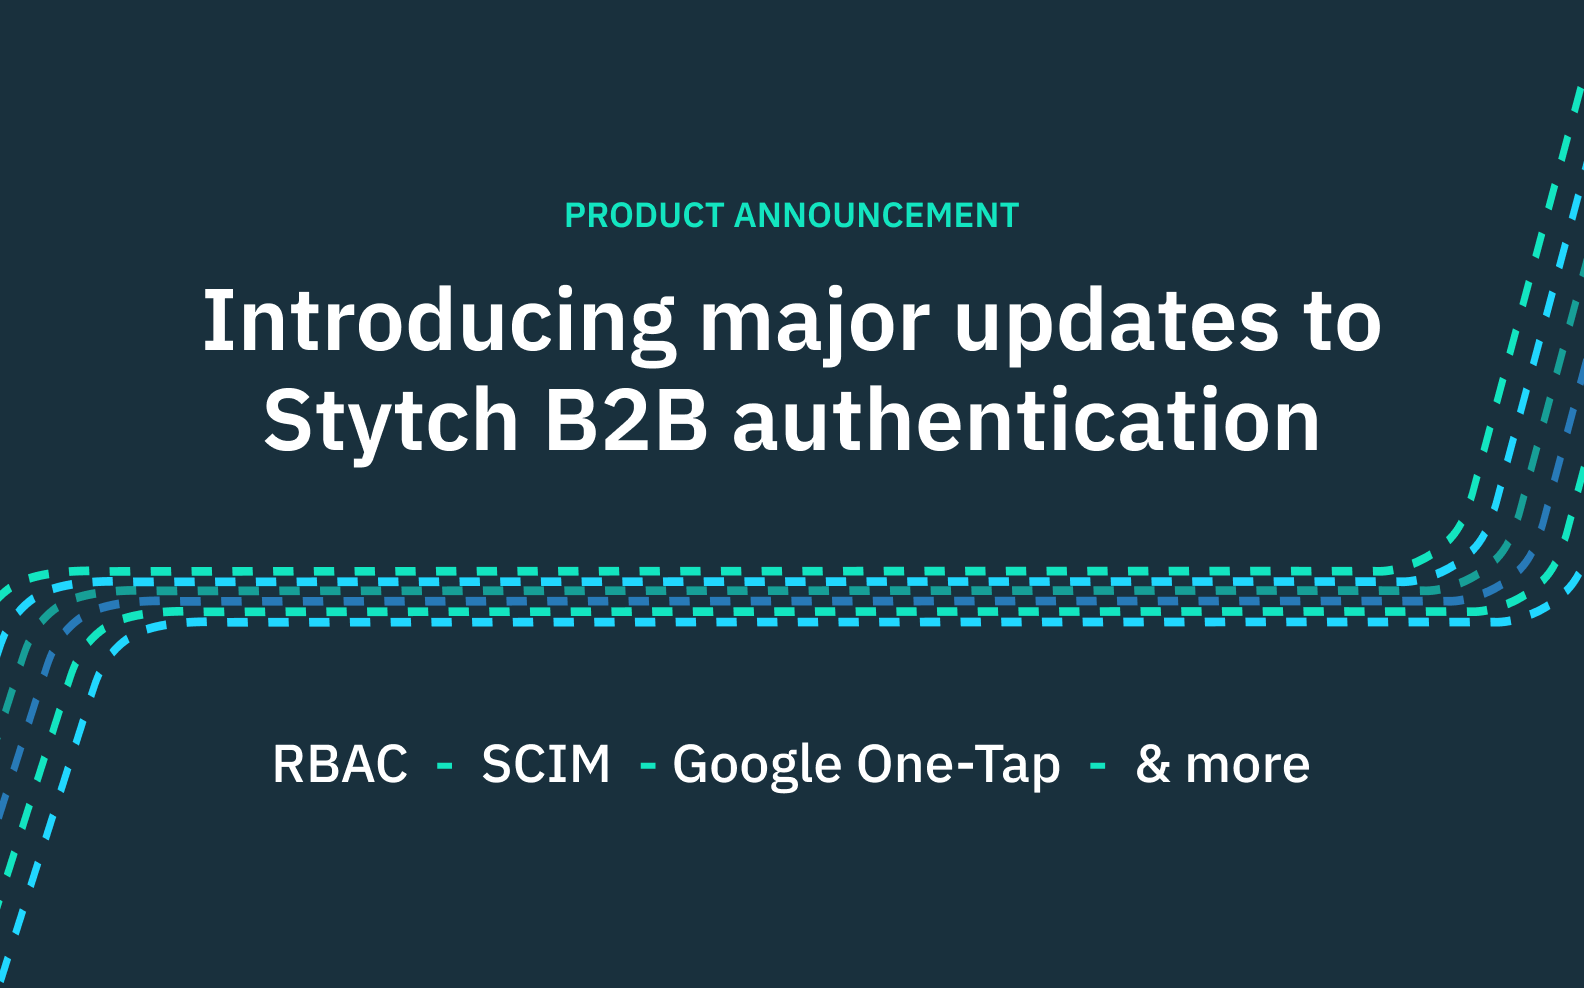 Introducing major updates to Stytch B2B authentication: RBAC, SCIM, Google One-Tap & more